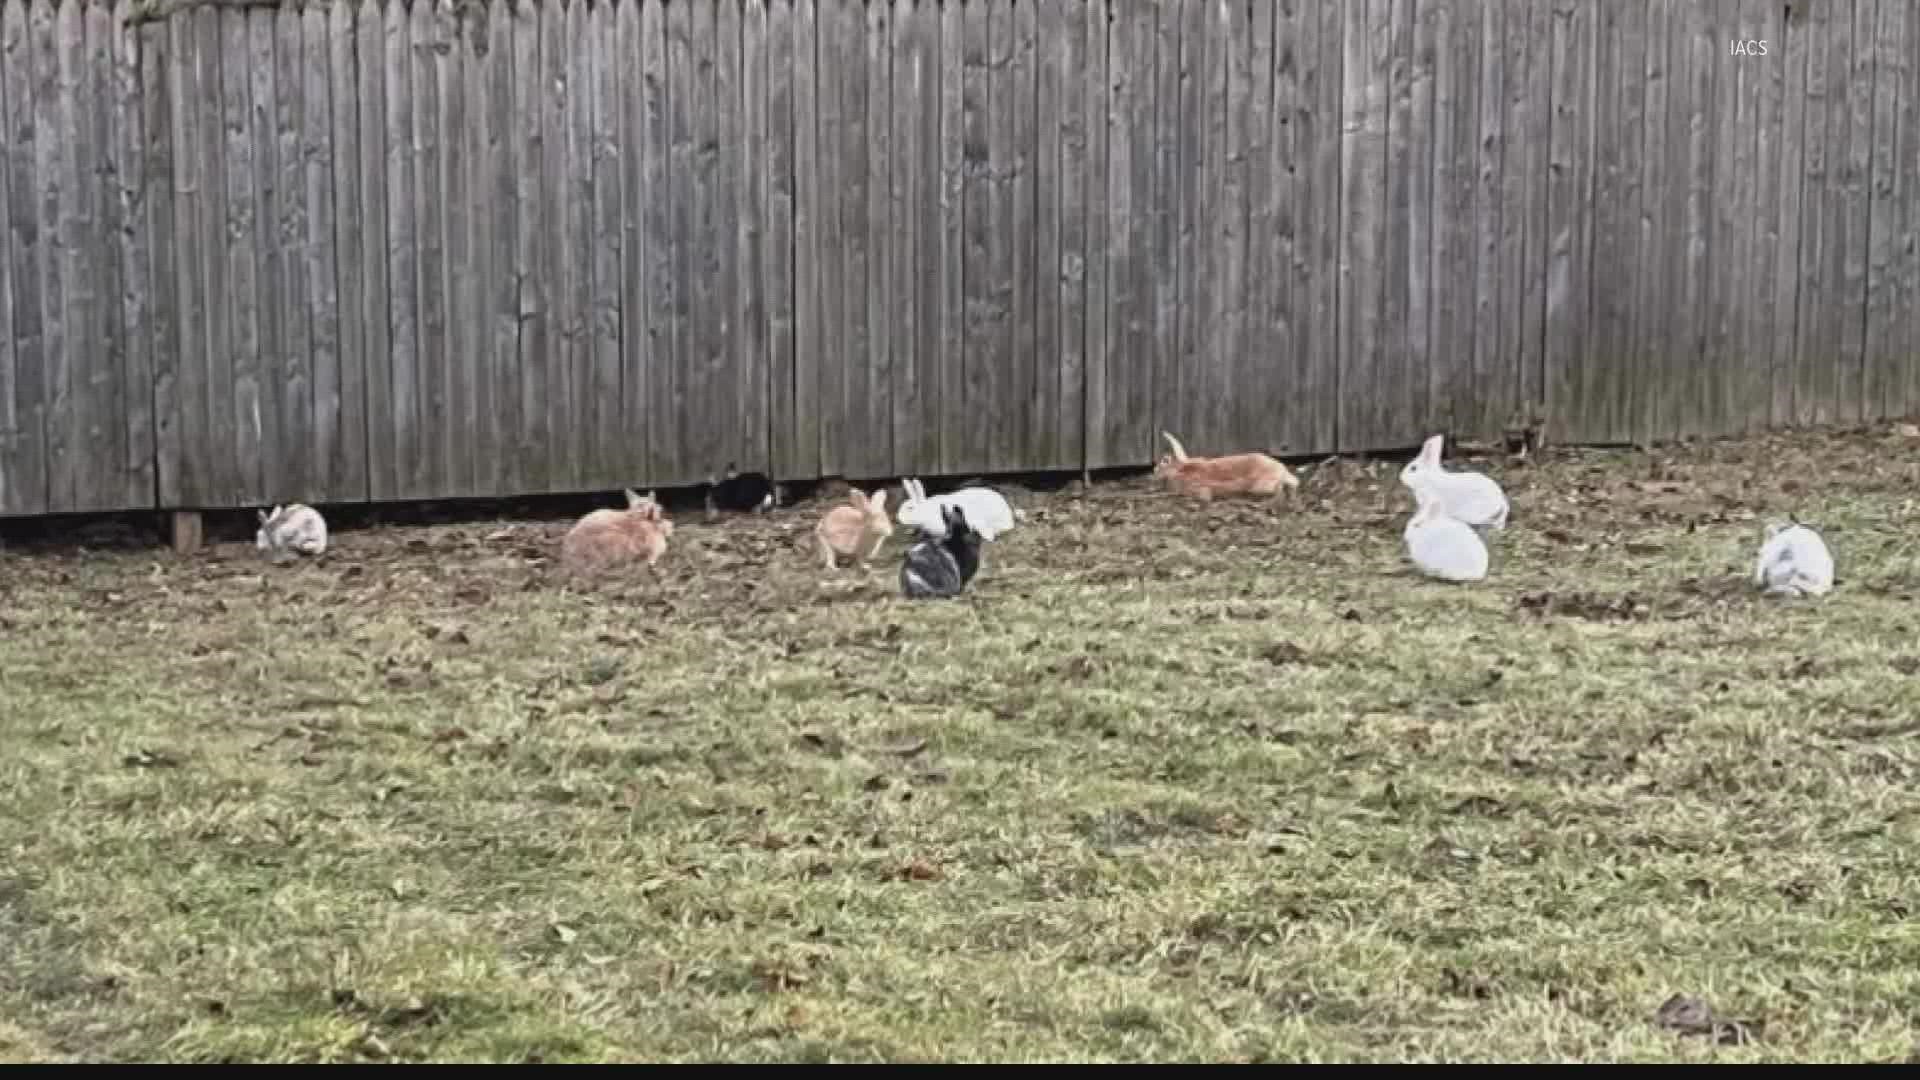 One of the rabbits was dead, several others were injured after Animal Control showed up to an east side neighborhood on reports 50 rabbits were dumped.